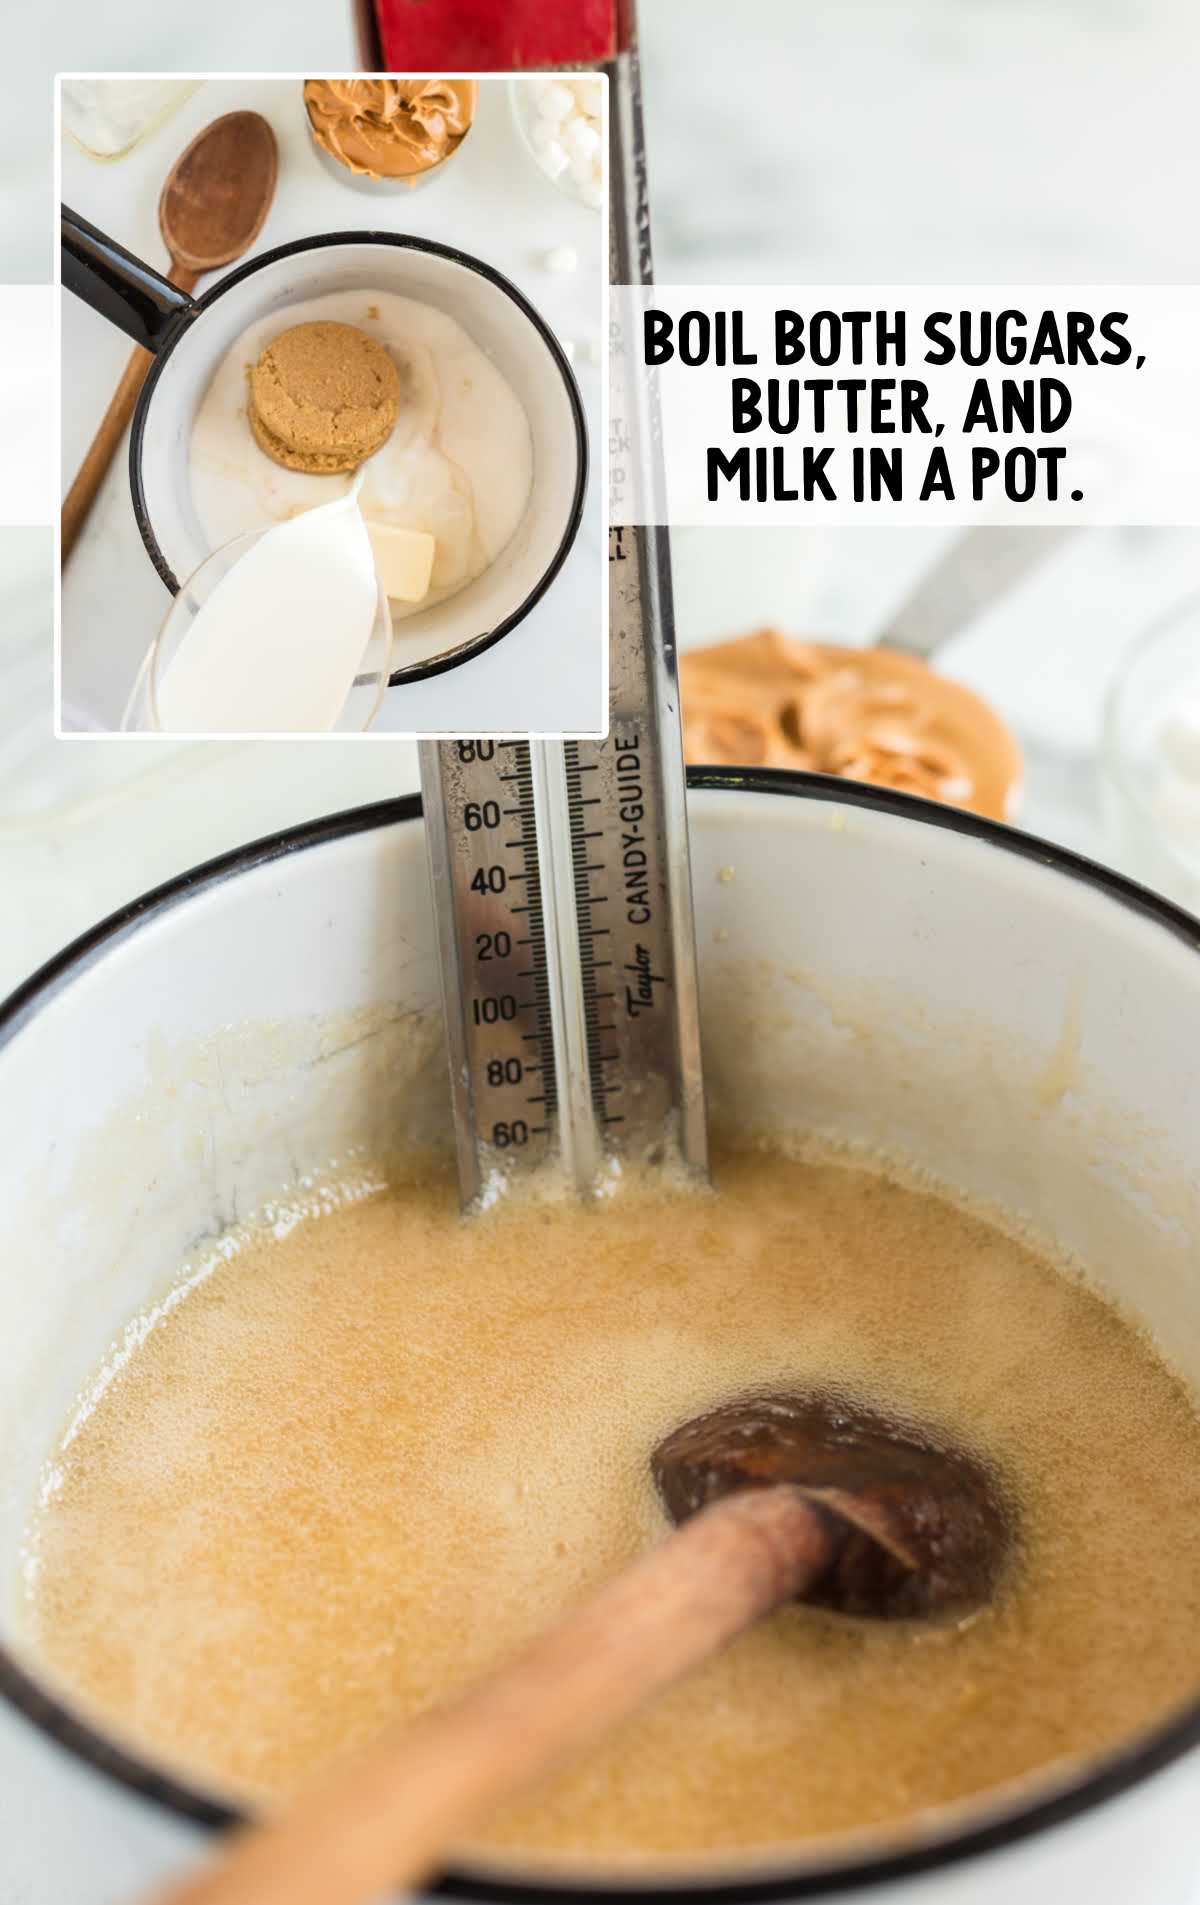 both sugars, butter, and milk boiled in a pot